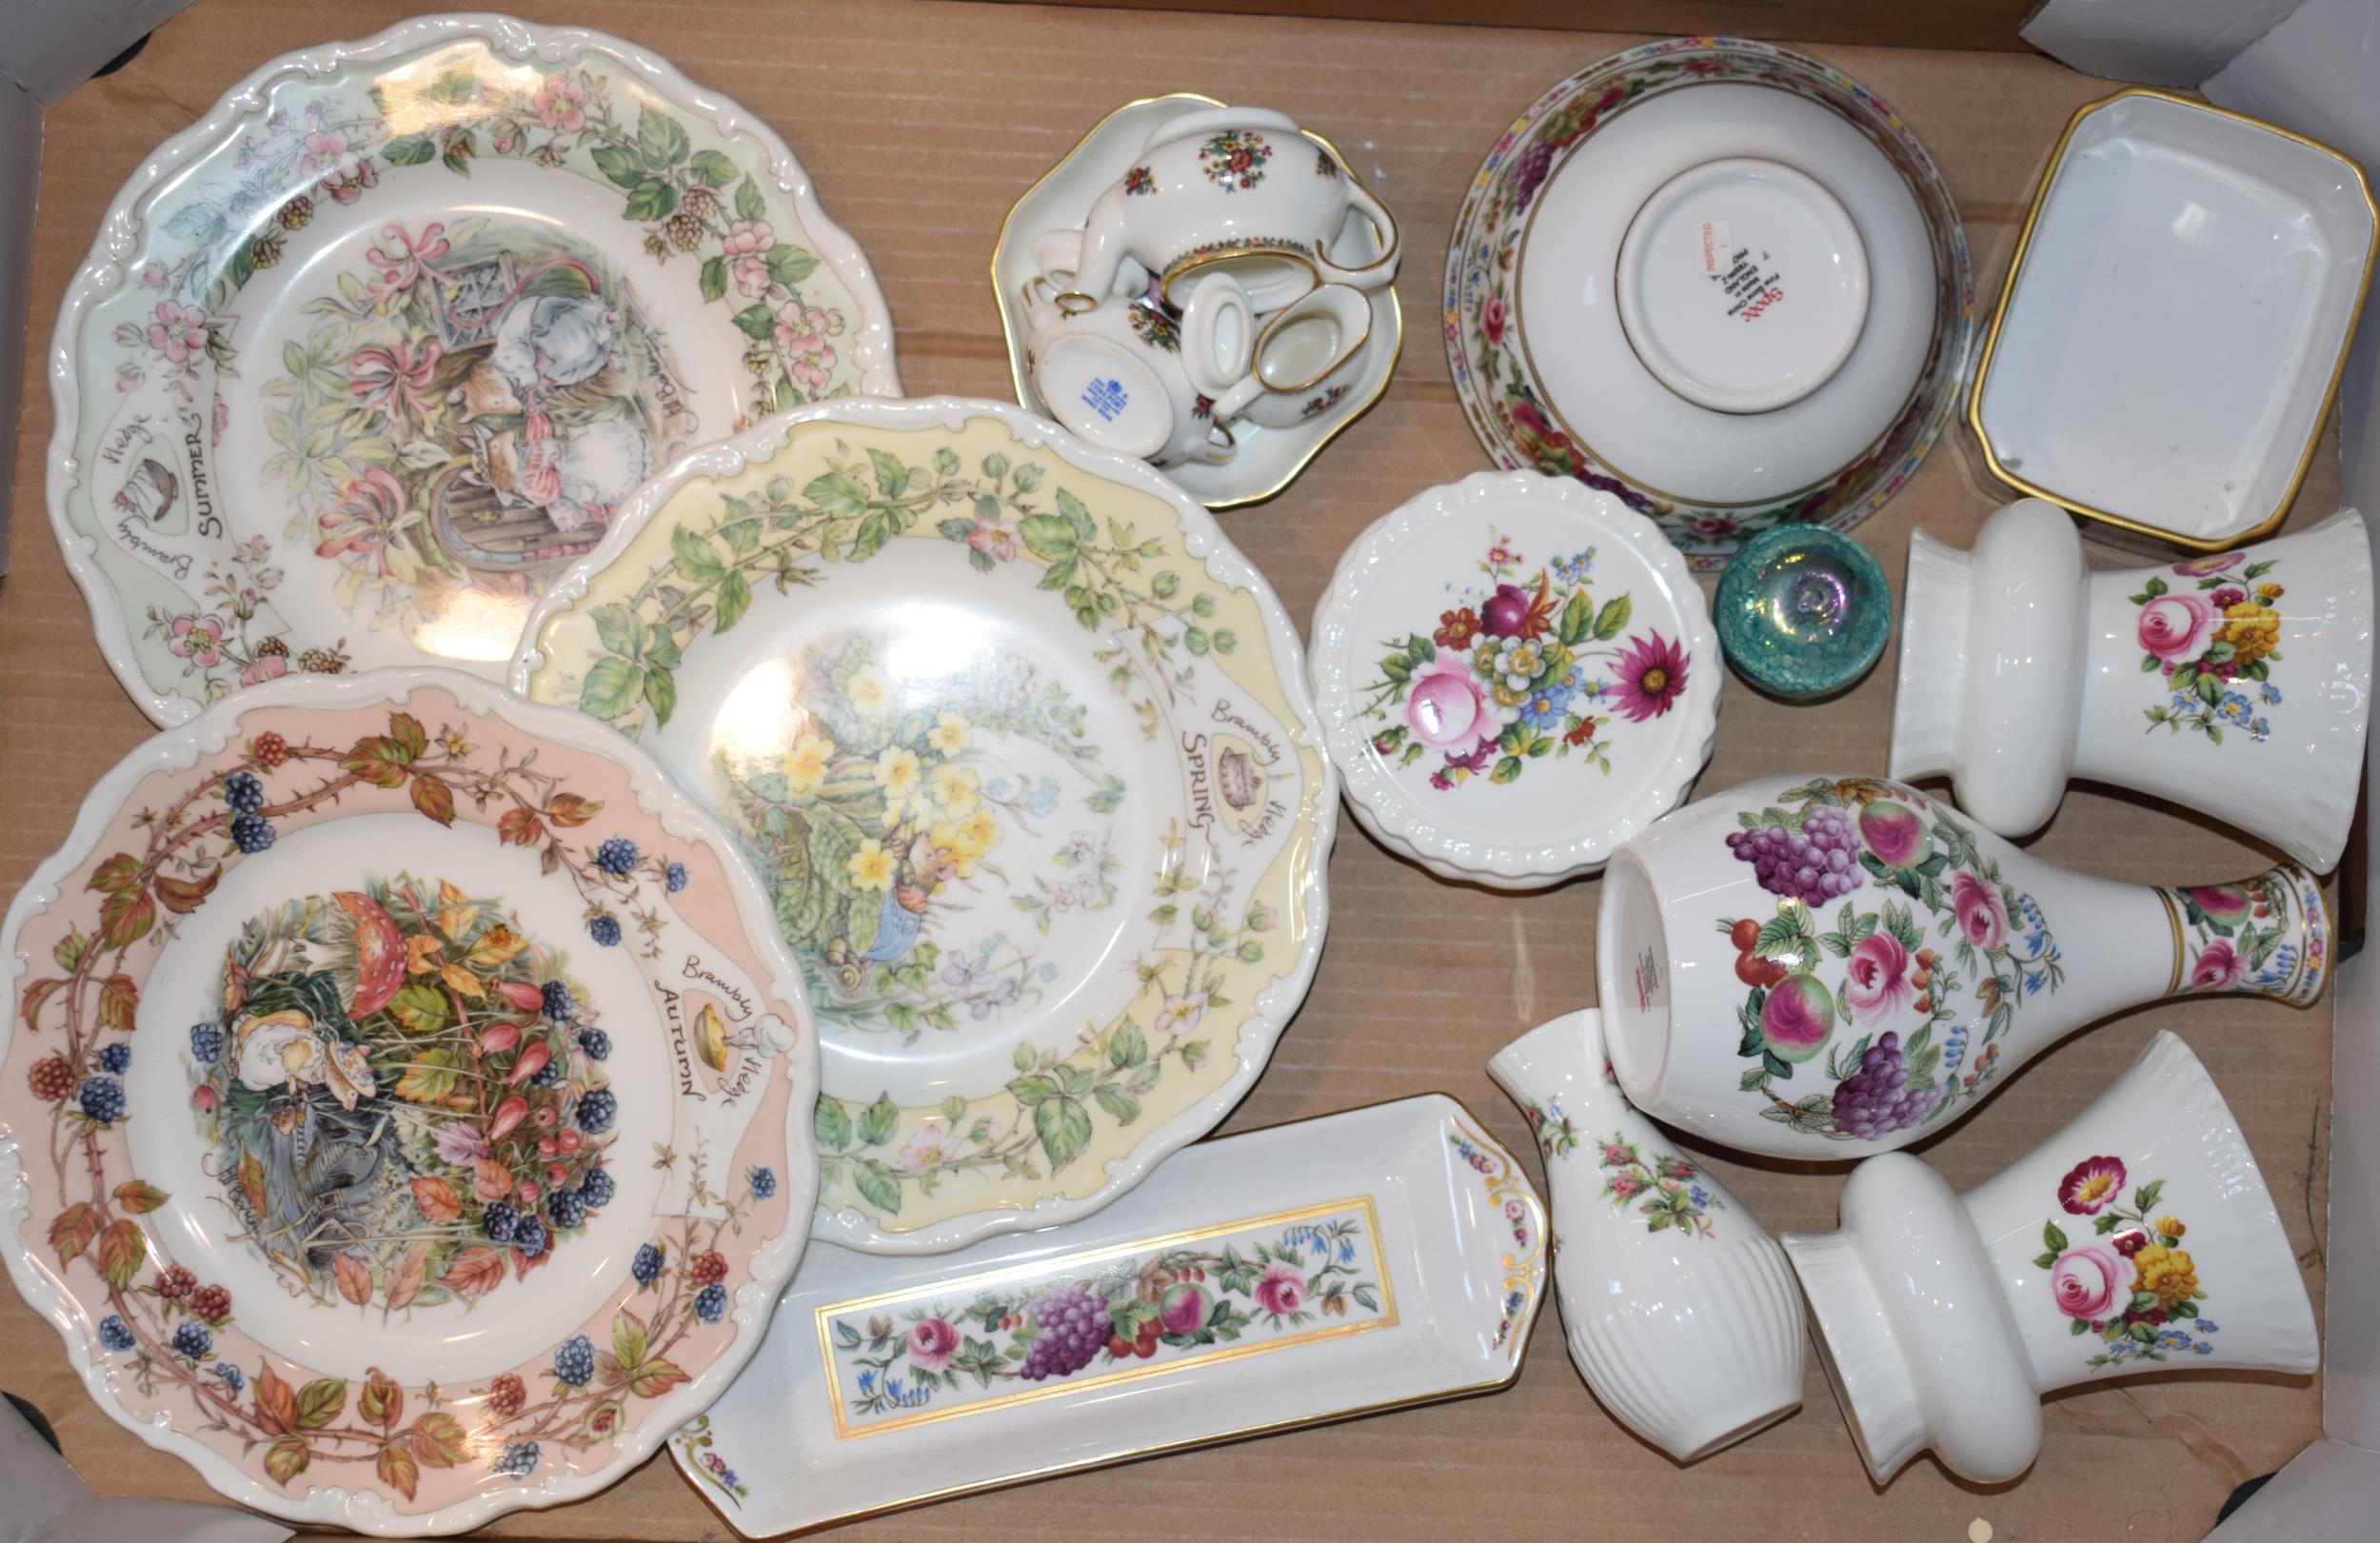 A collection of pottery to include three Royal Doulton Brambly Hedge Seasons plates, a miniature